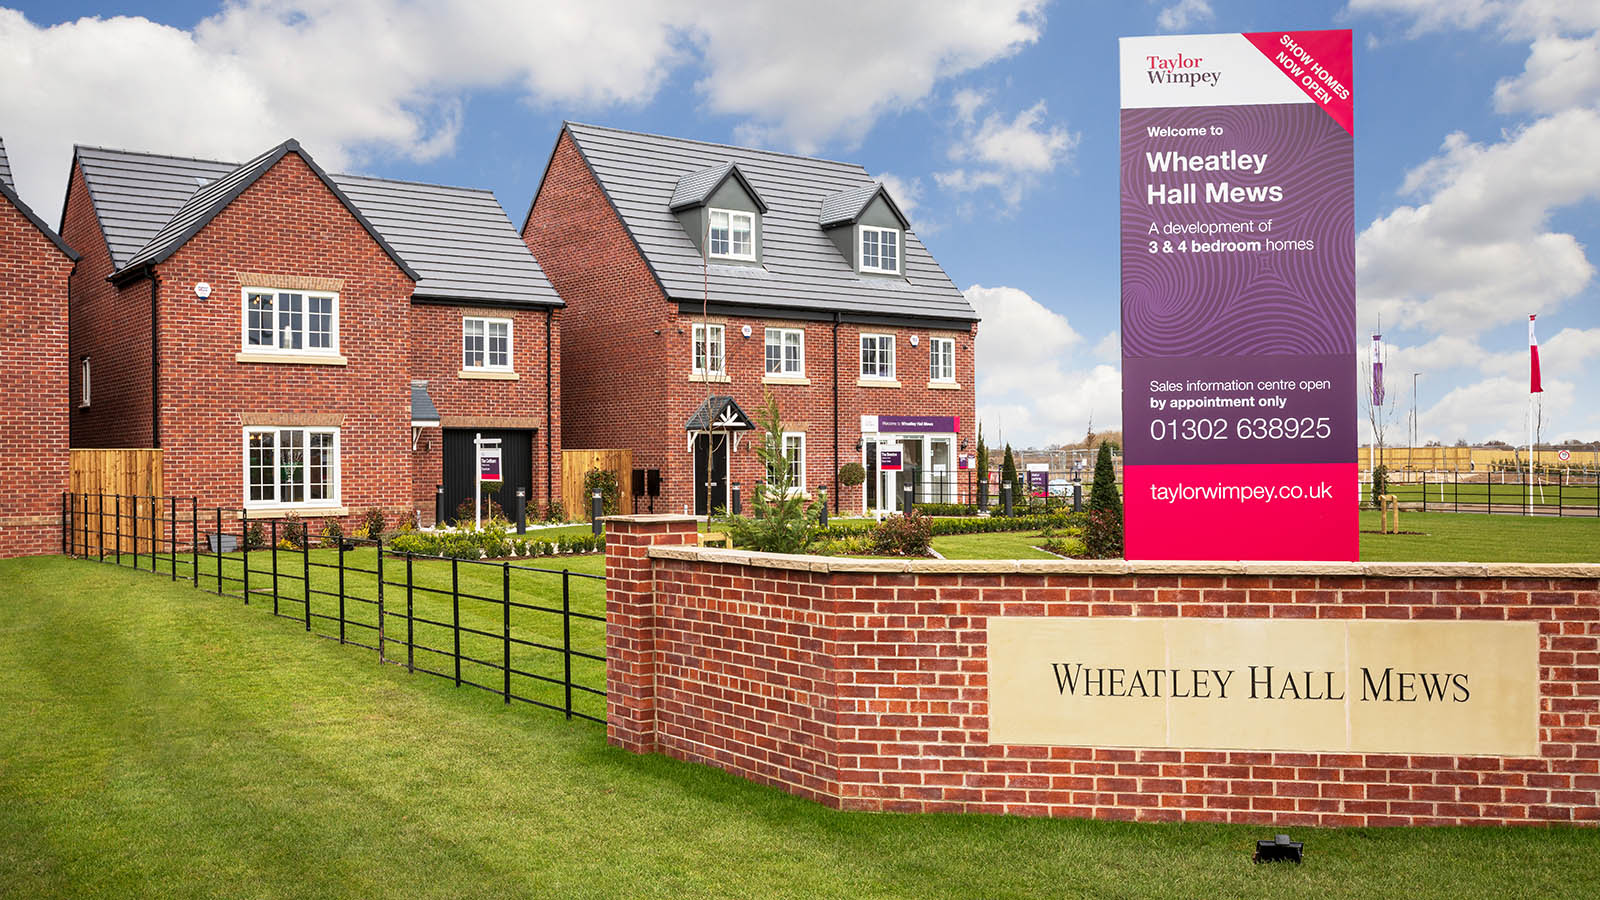 Wheatley Hall News (Taylor Wimpey)